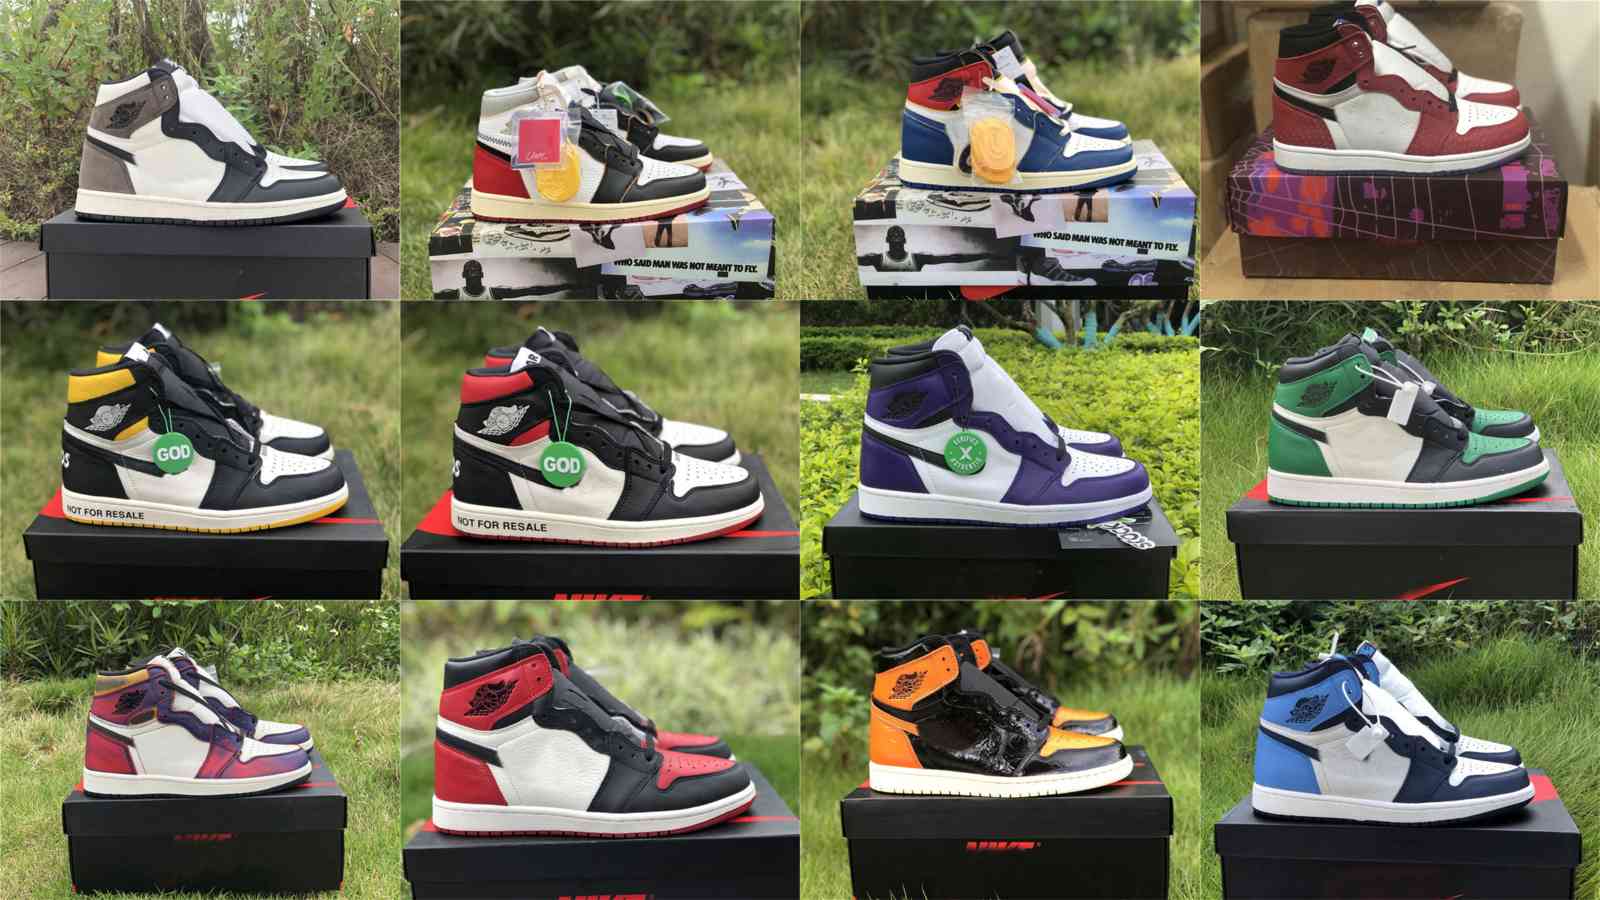 

2021 Authentic 1 High OG Dark Mocha 1S Not for Resale Pine Green Court Purple Union Los Angeles Bred Toe Origin Story Defiant Men Shoes With Box